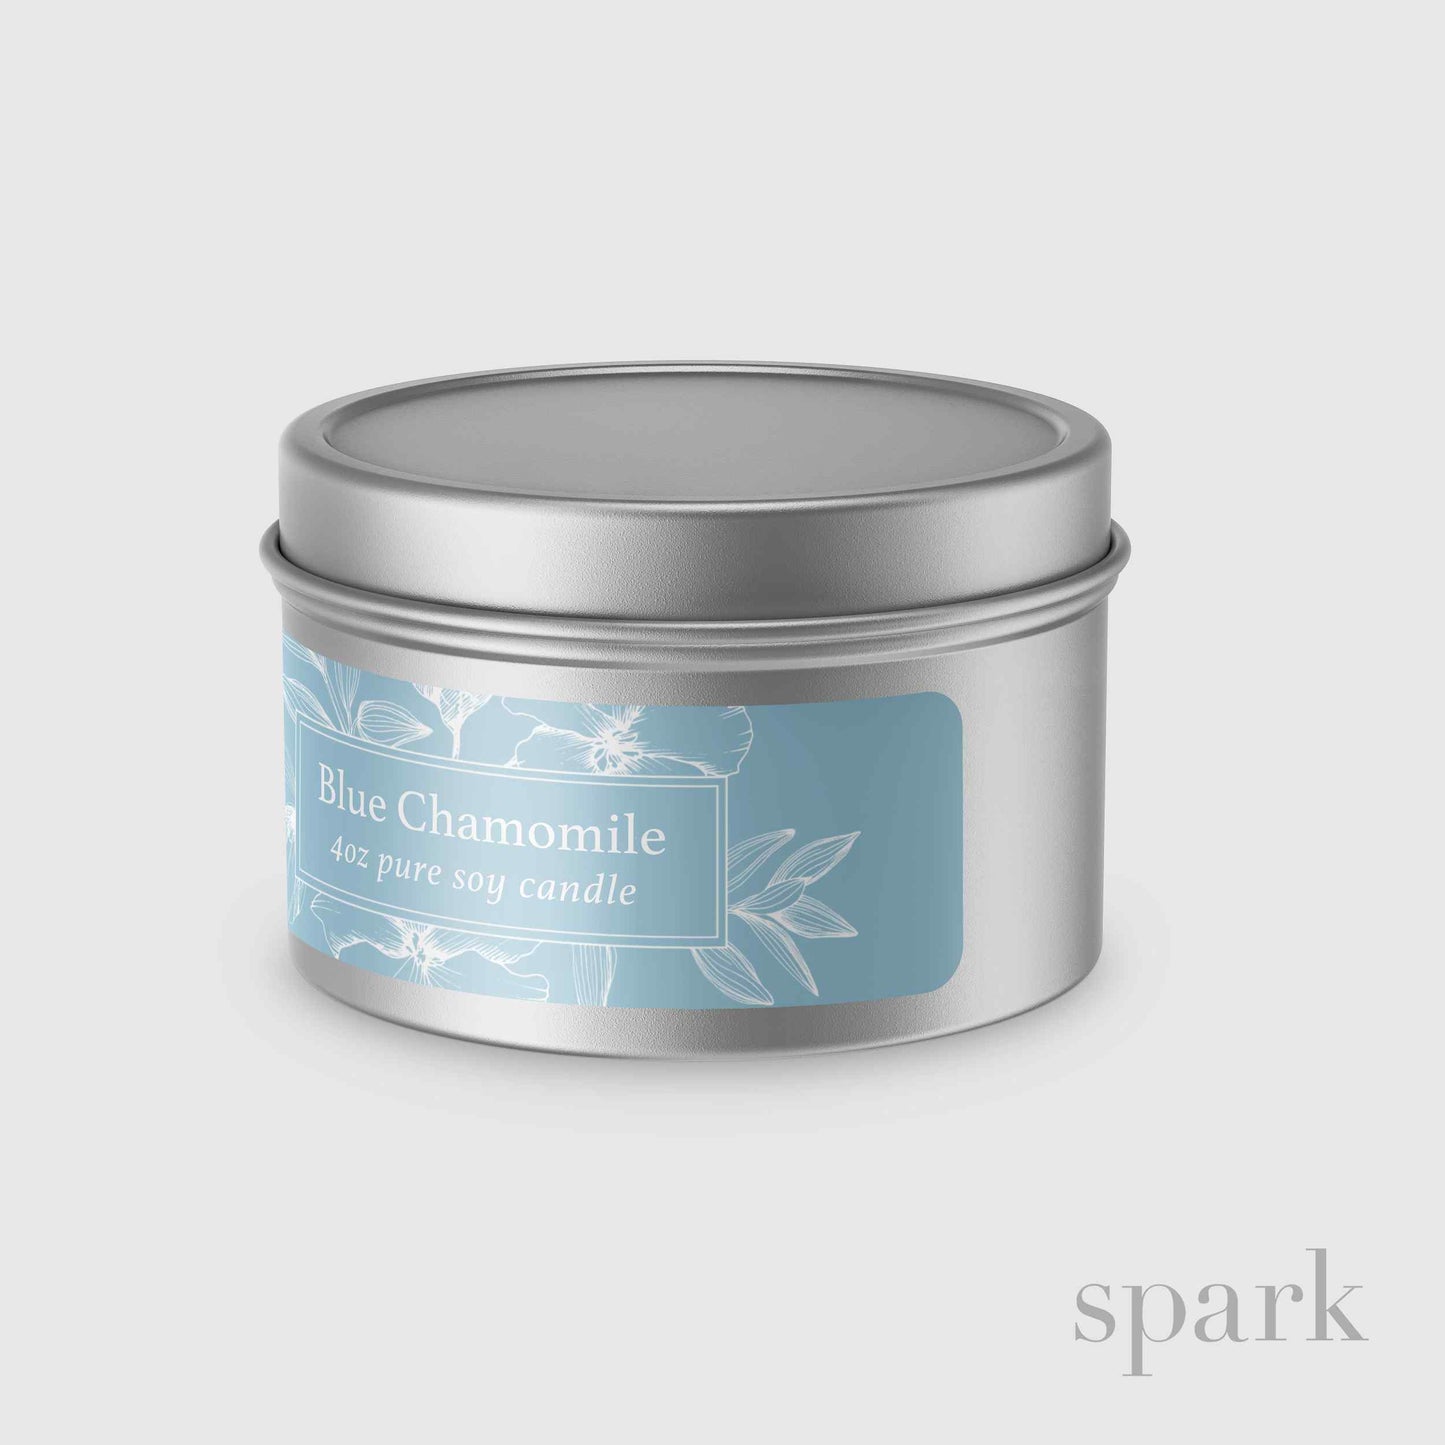 Custom 4oz Aromatherapy Soy Candle in Silver Tin - Choose Your Label Design & Scent